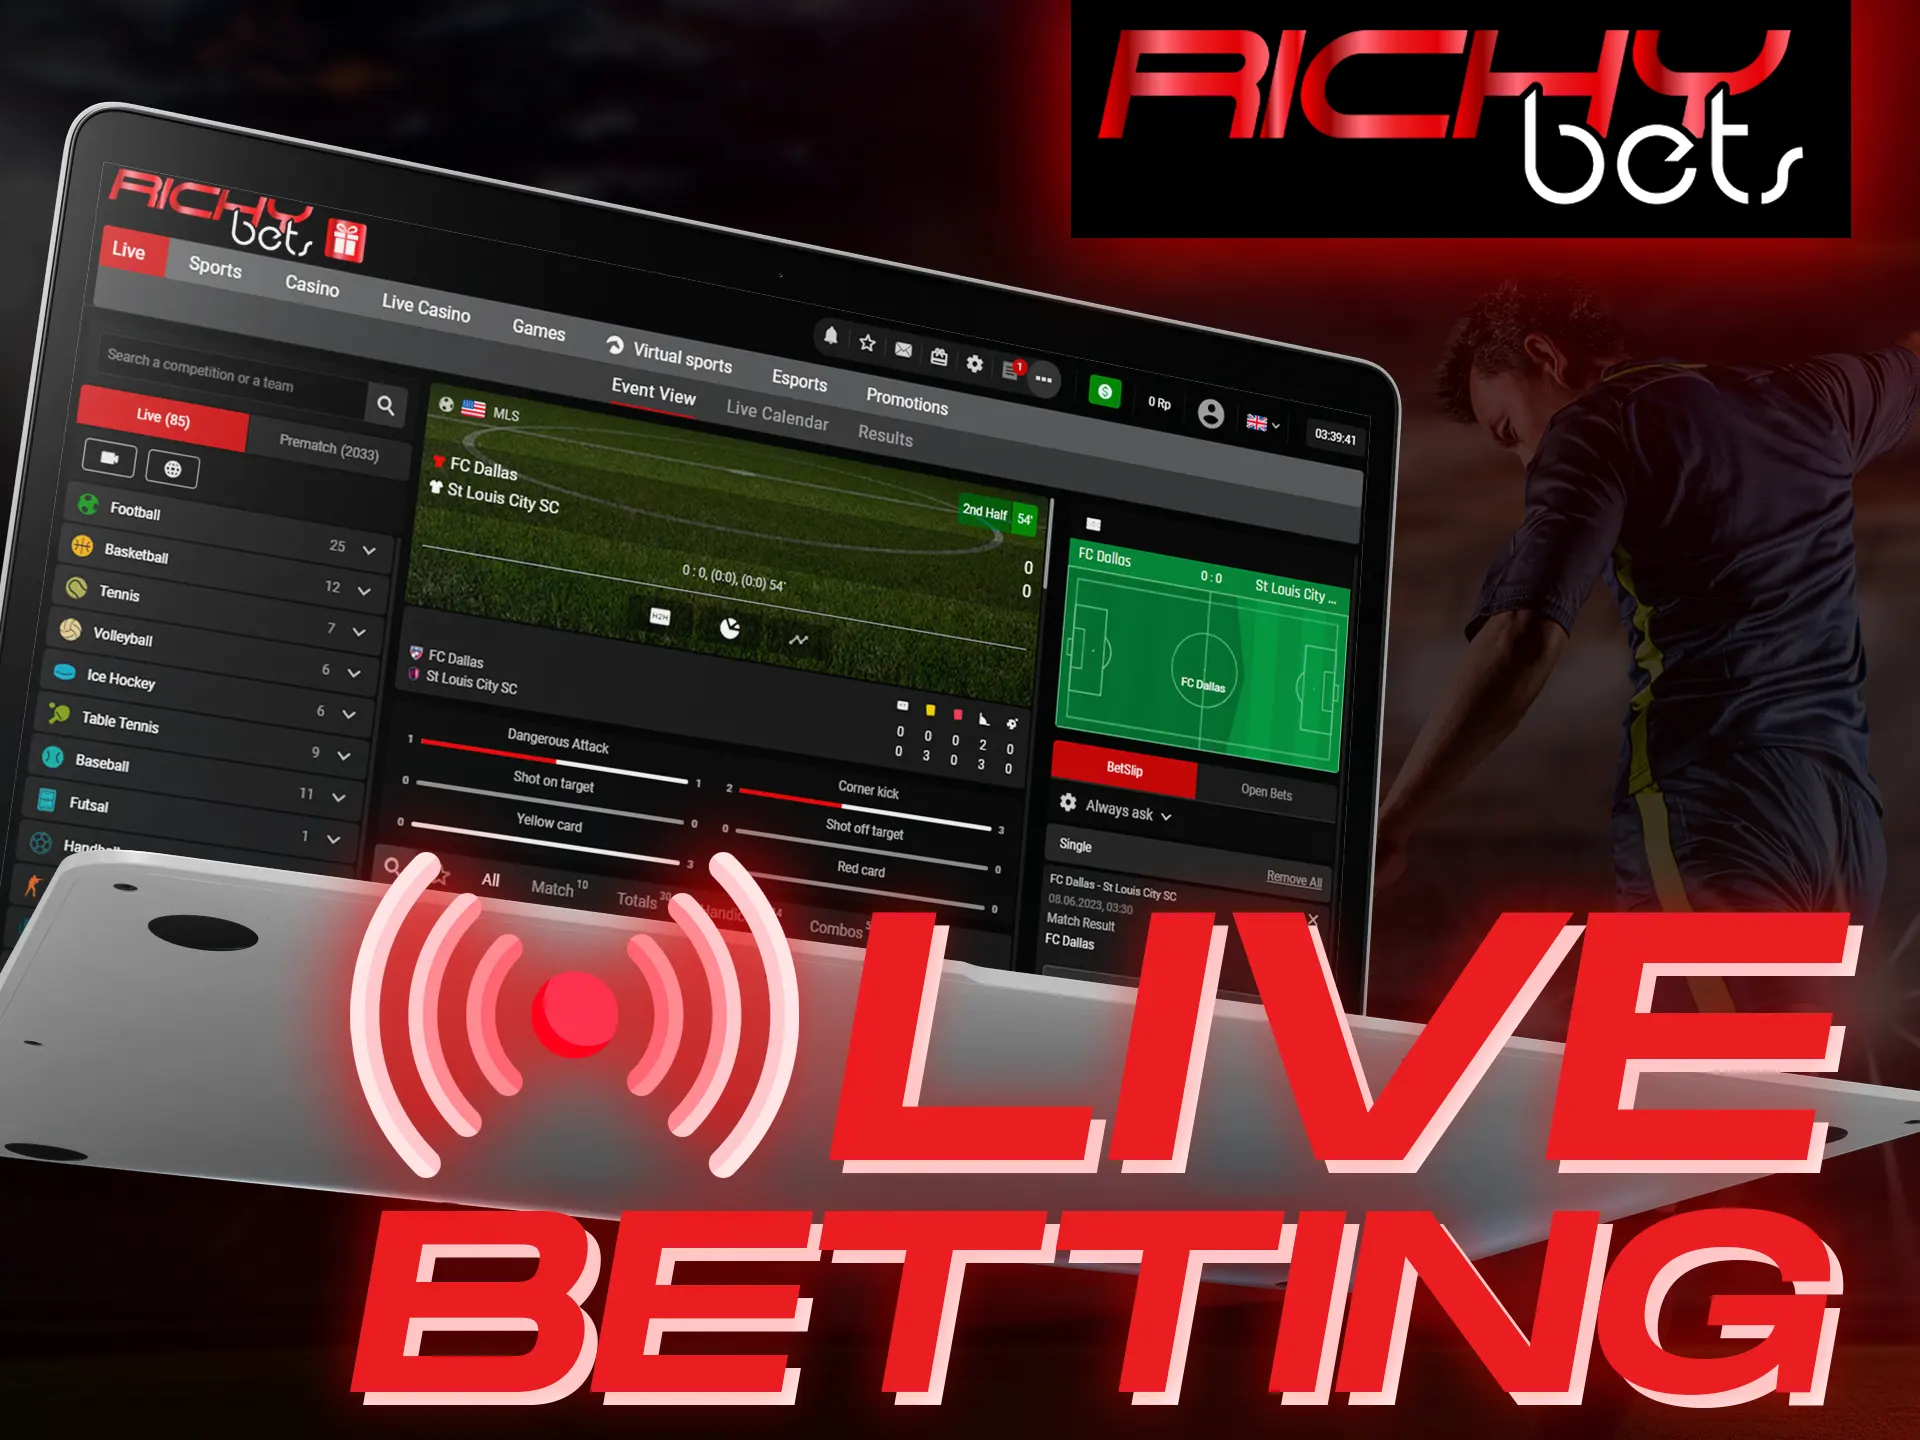 Bet on sports matches in a live format at the Richybets.